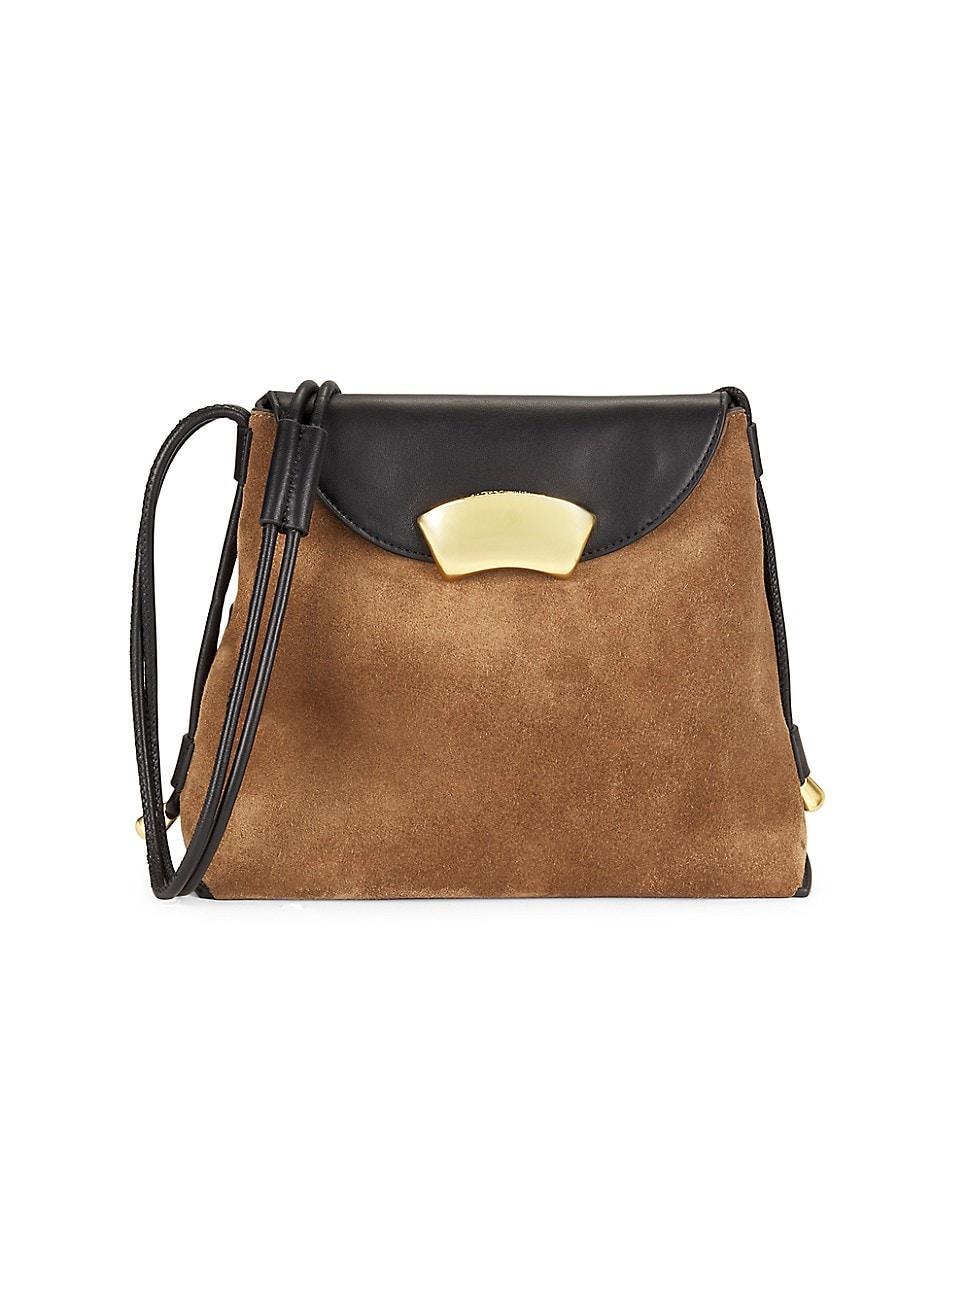 Womens Petite ID Suede & Leather Shoulder Bag Product Image